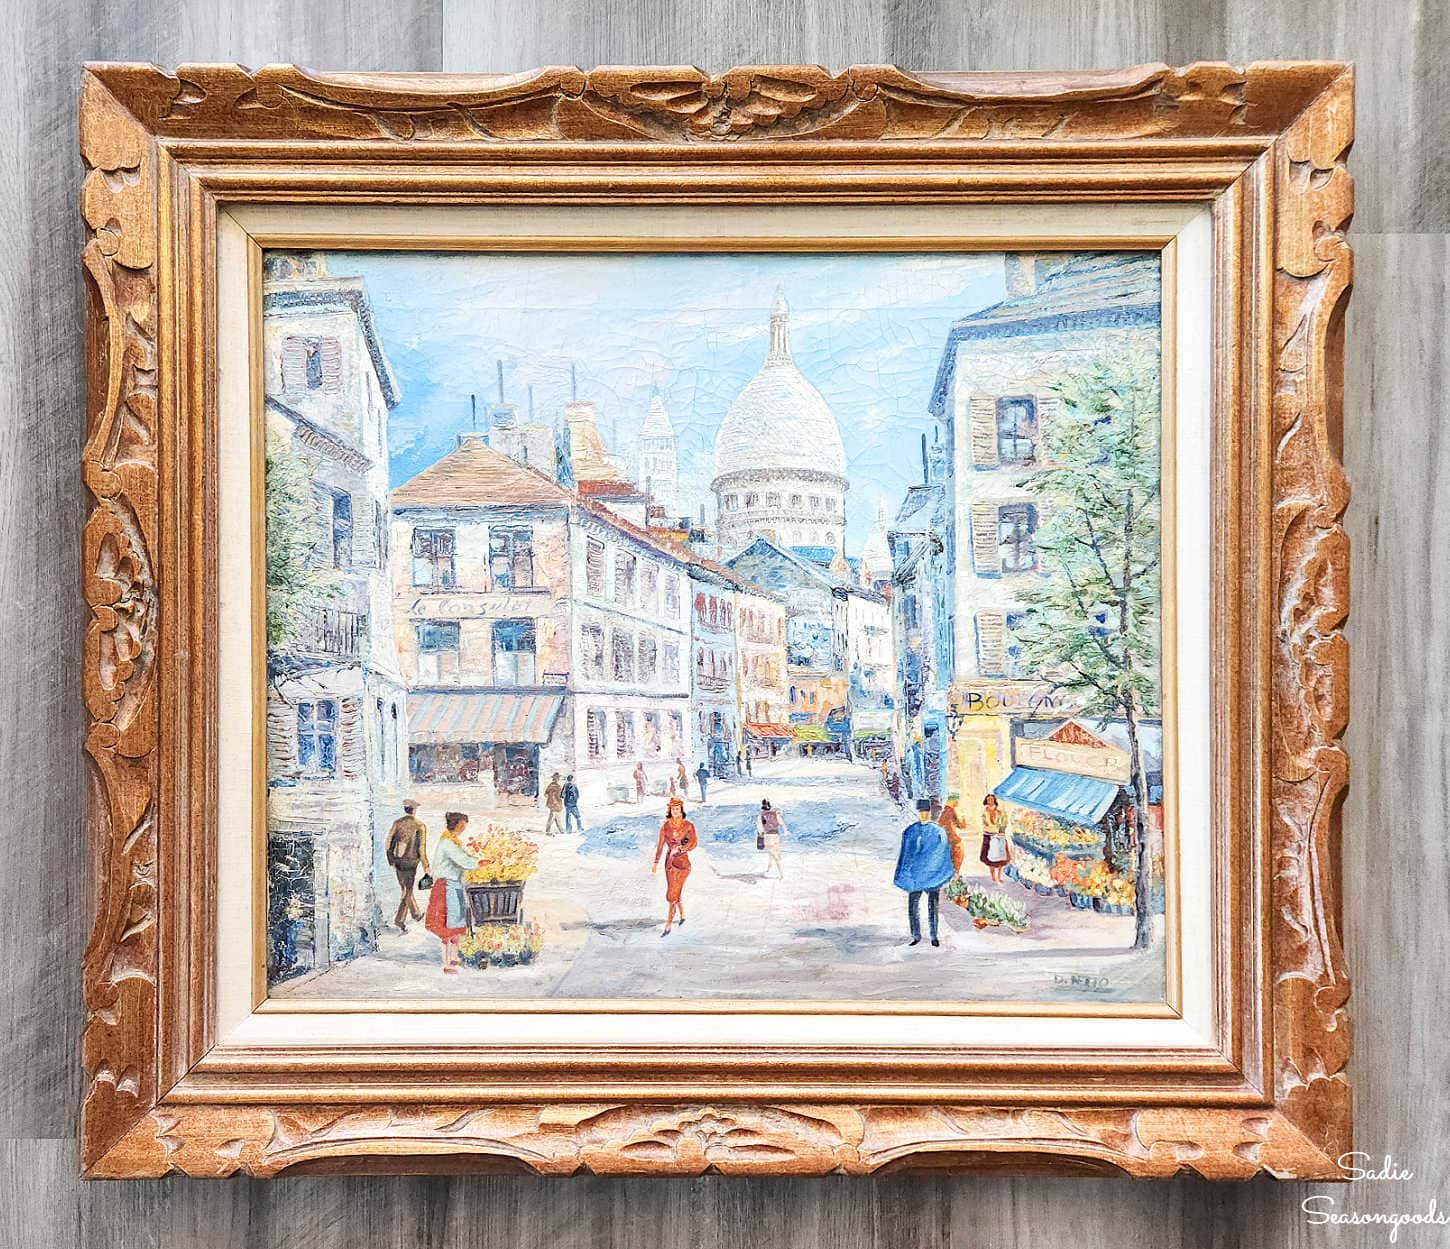 Framing a Vintage Painting